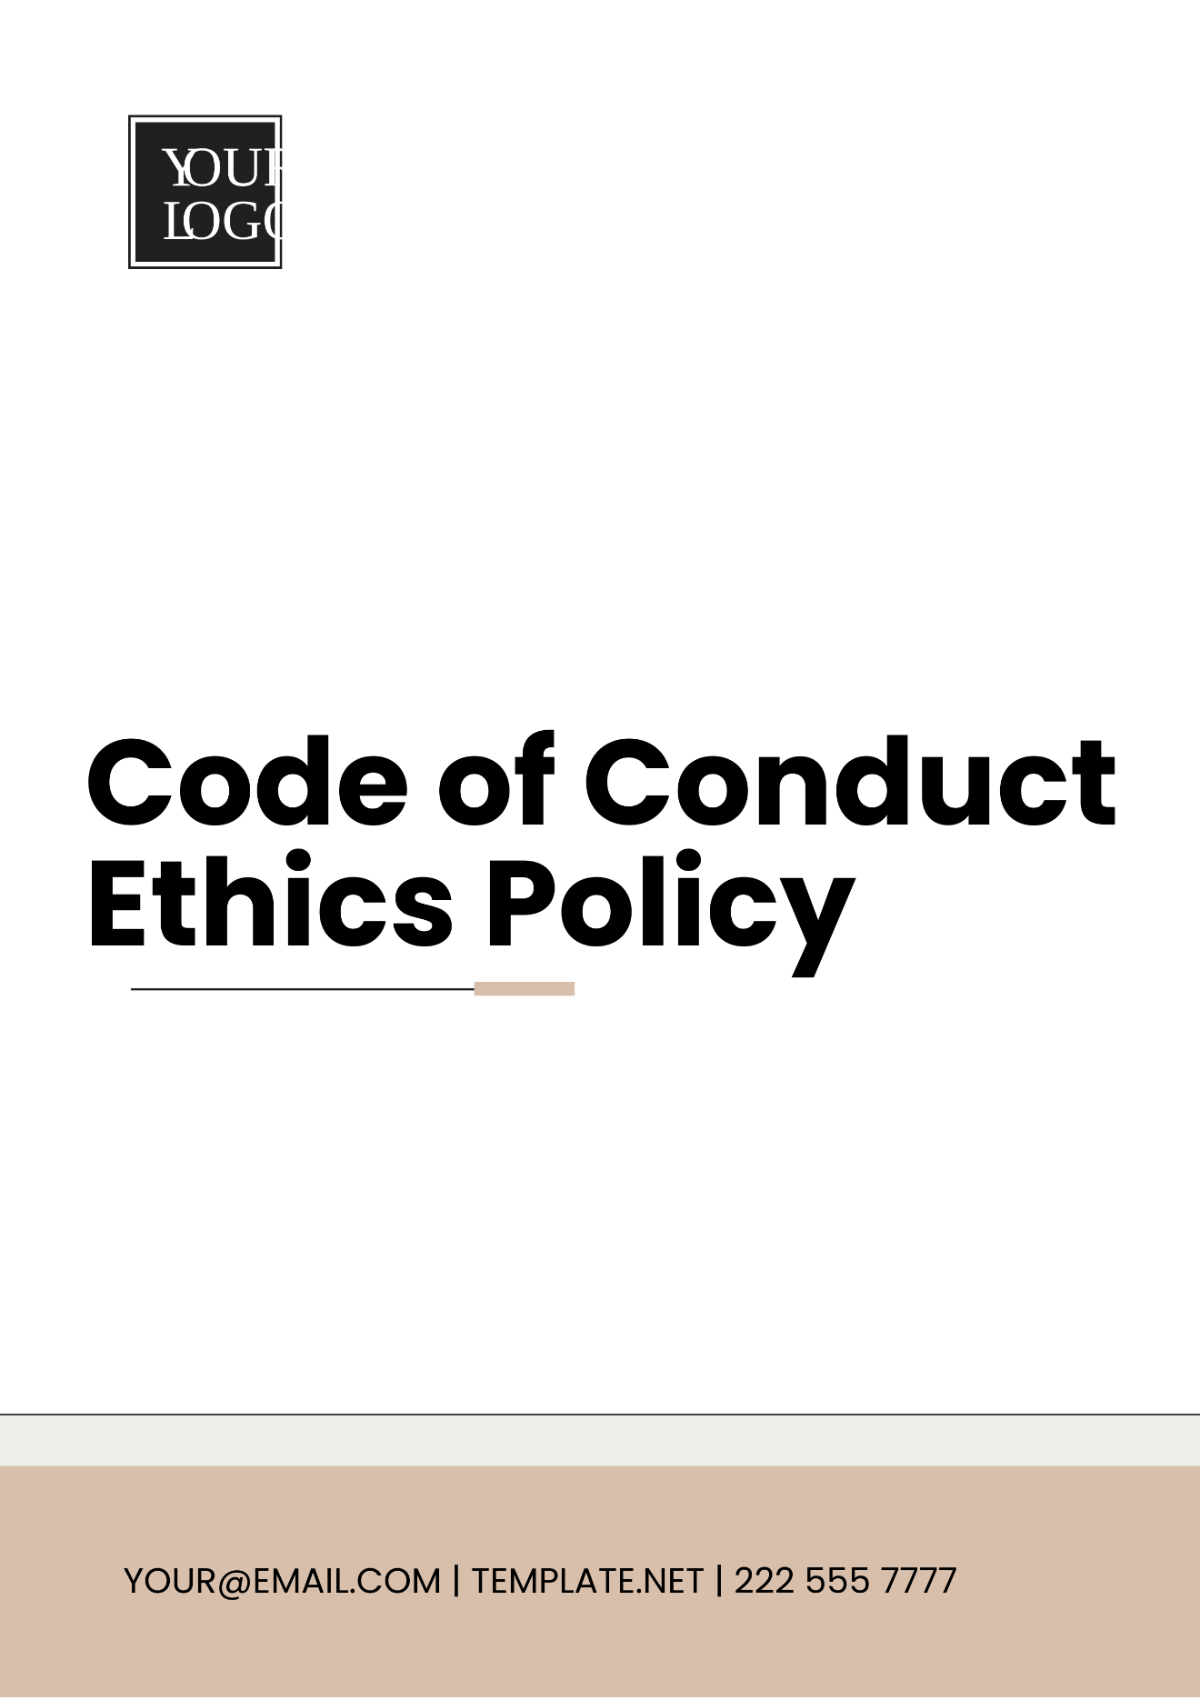 Code of Conduct Ethics Policy Template